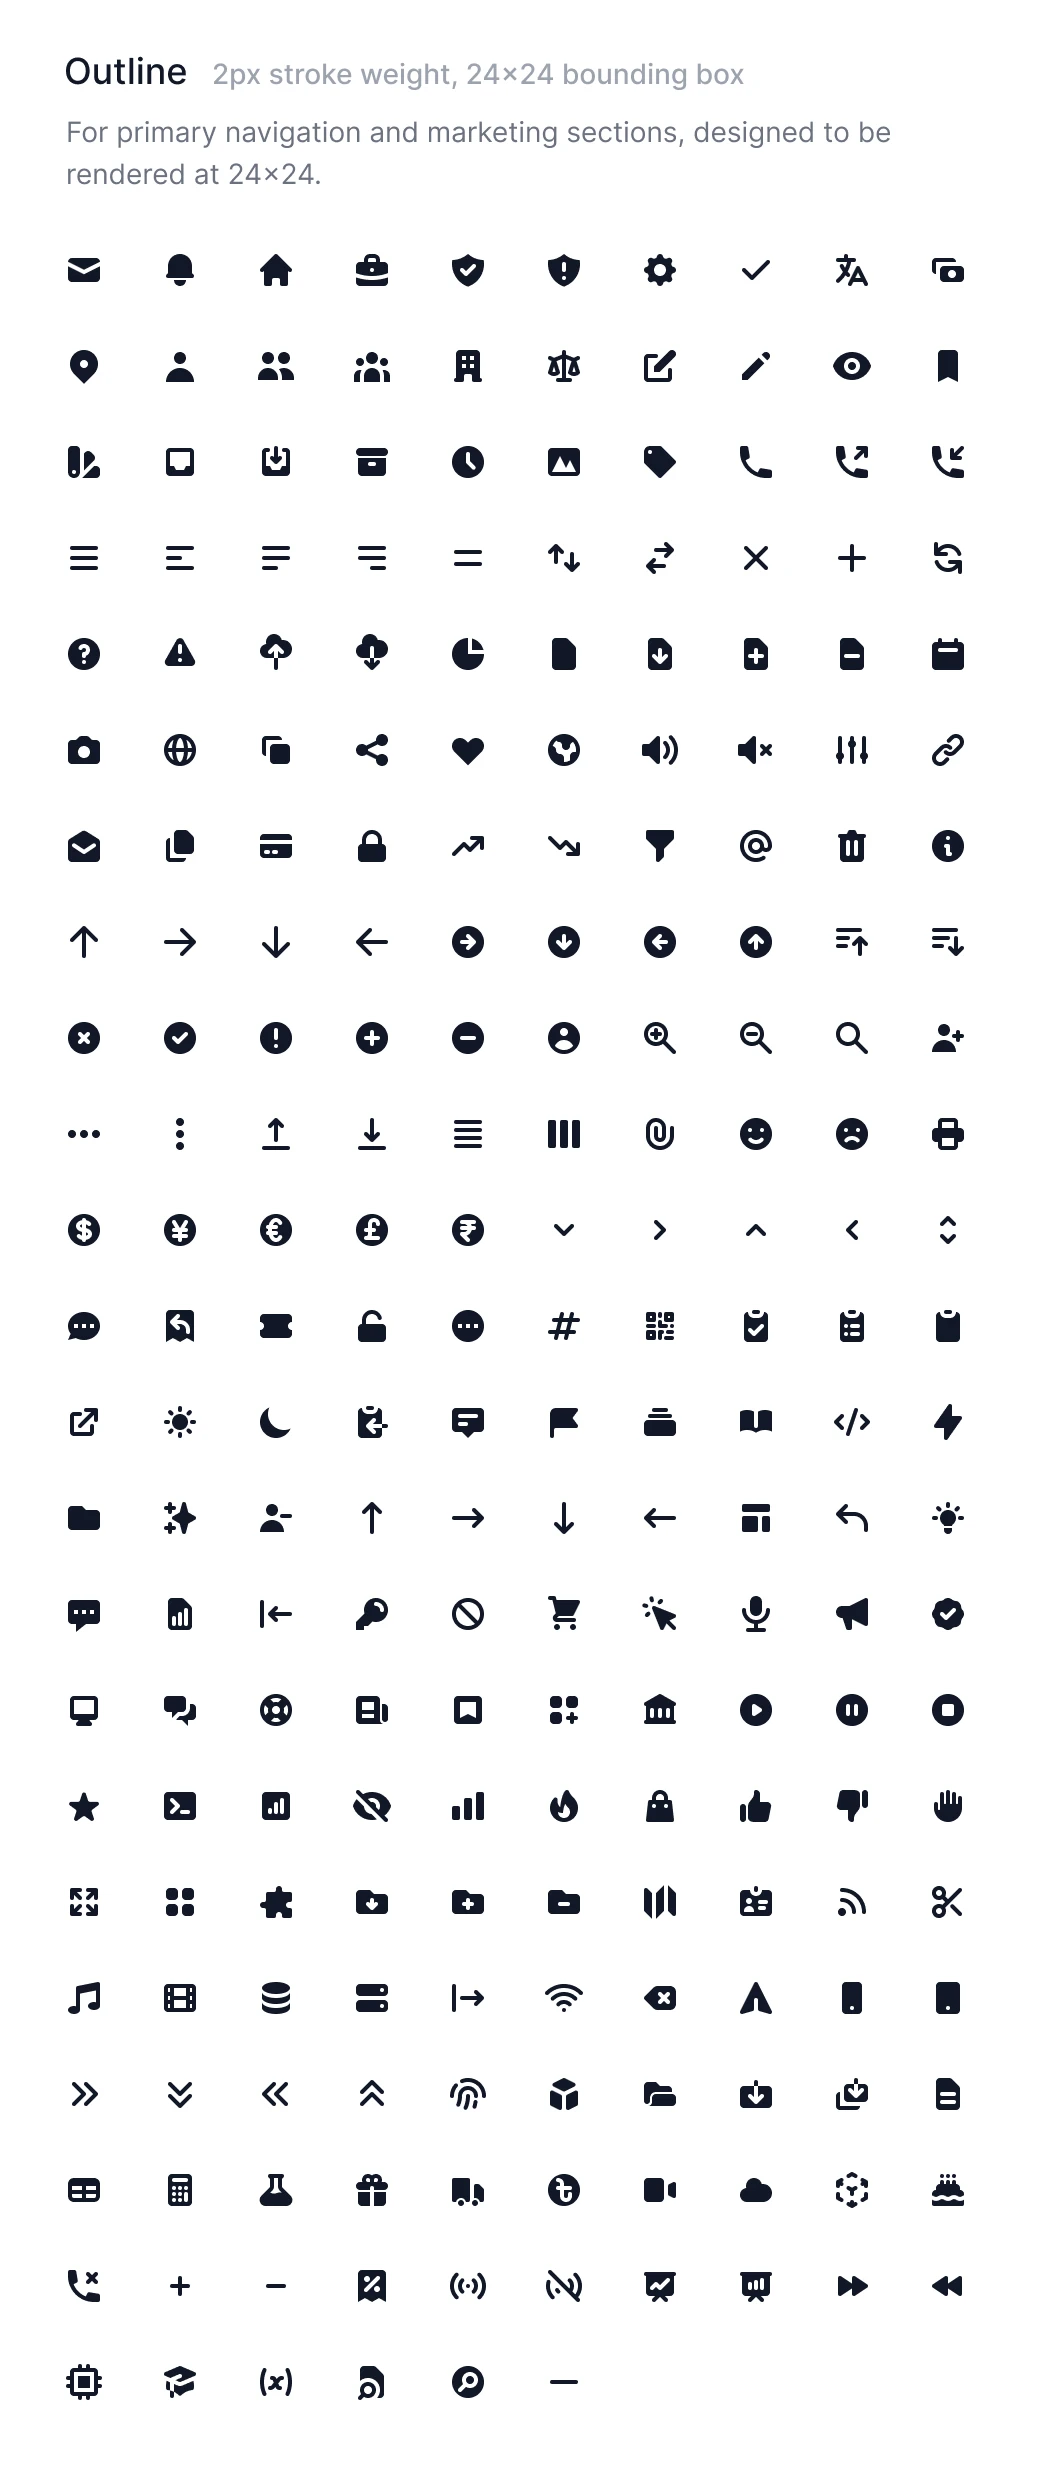 Heroicons - Beautiful hand-crafted SVG icons, by the makers of Tailwind CSS.